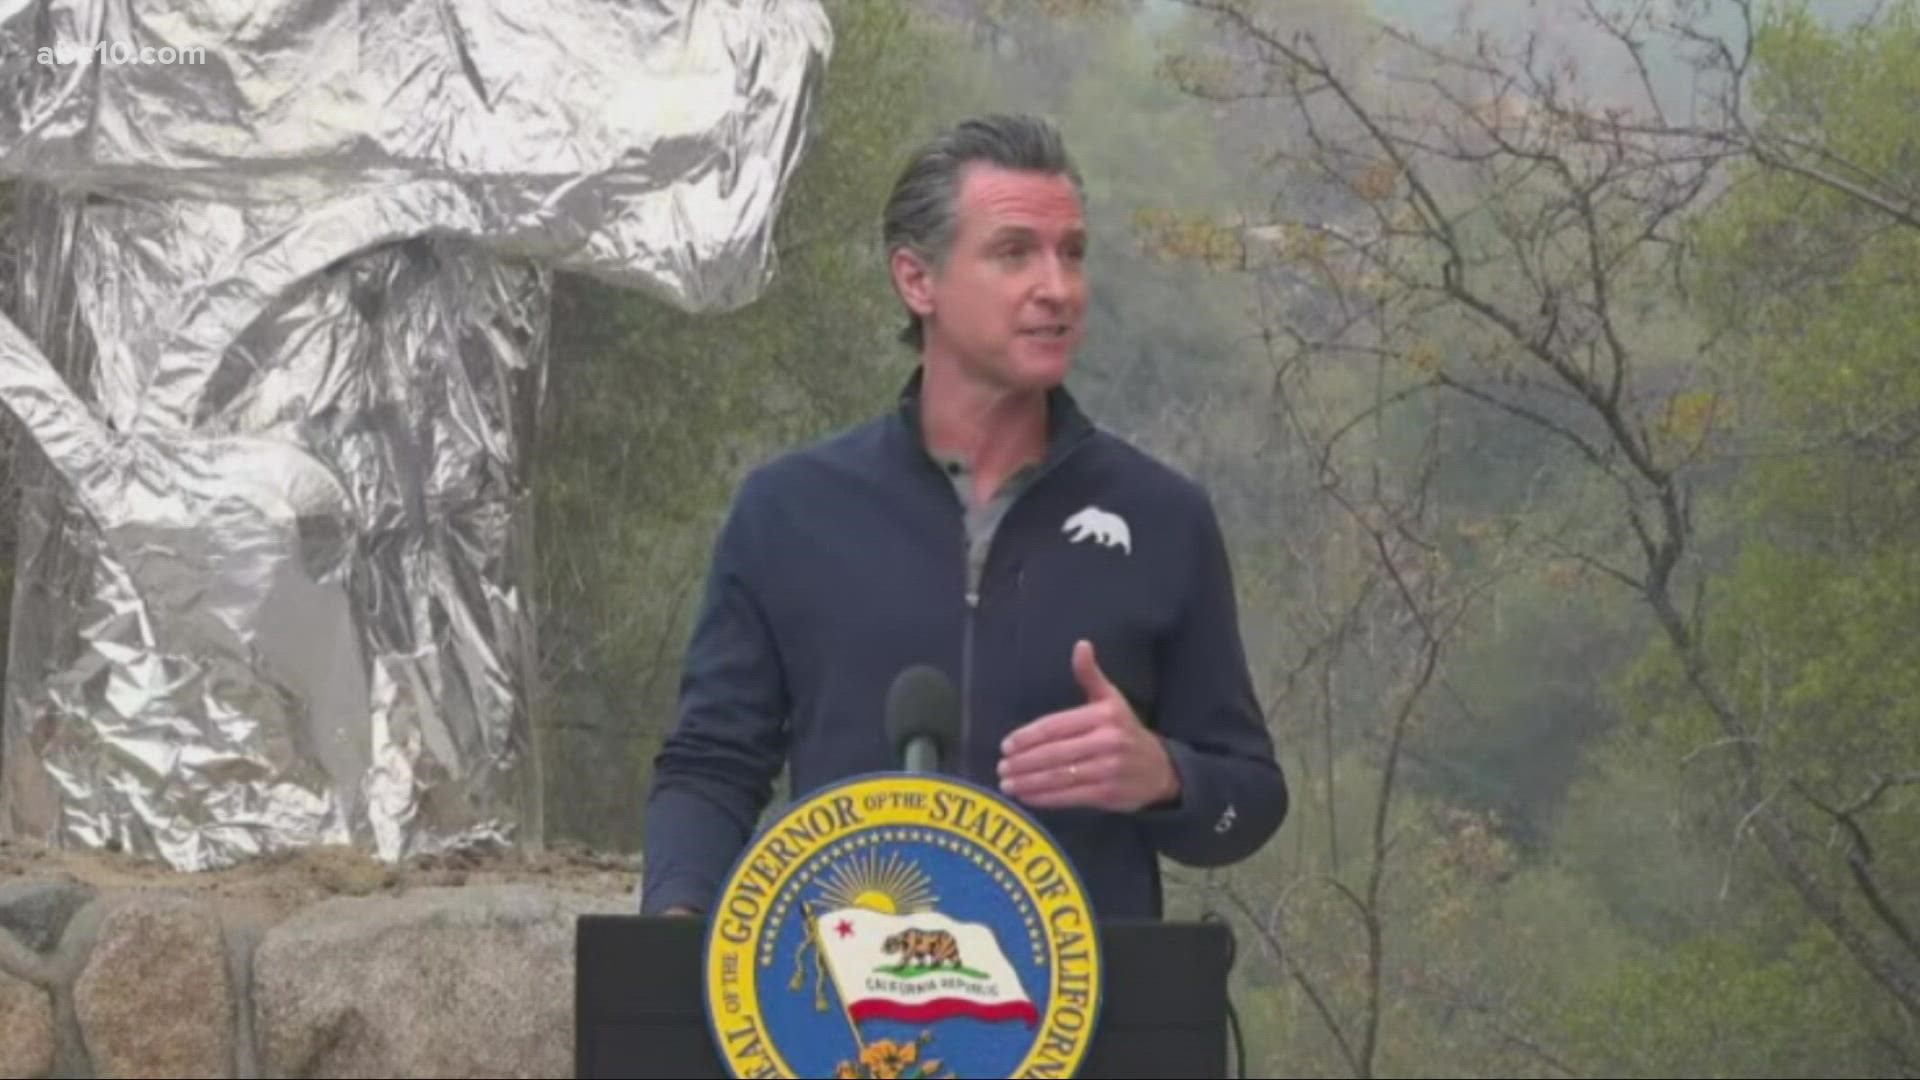 Gov. Newsom says this package will make California more resilient against drought and wildfires, but critics say it doesn't go far enough.